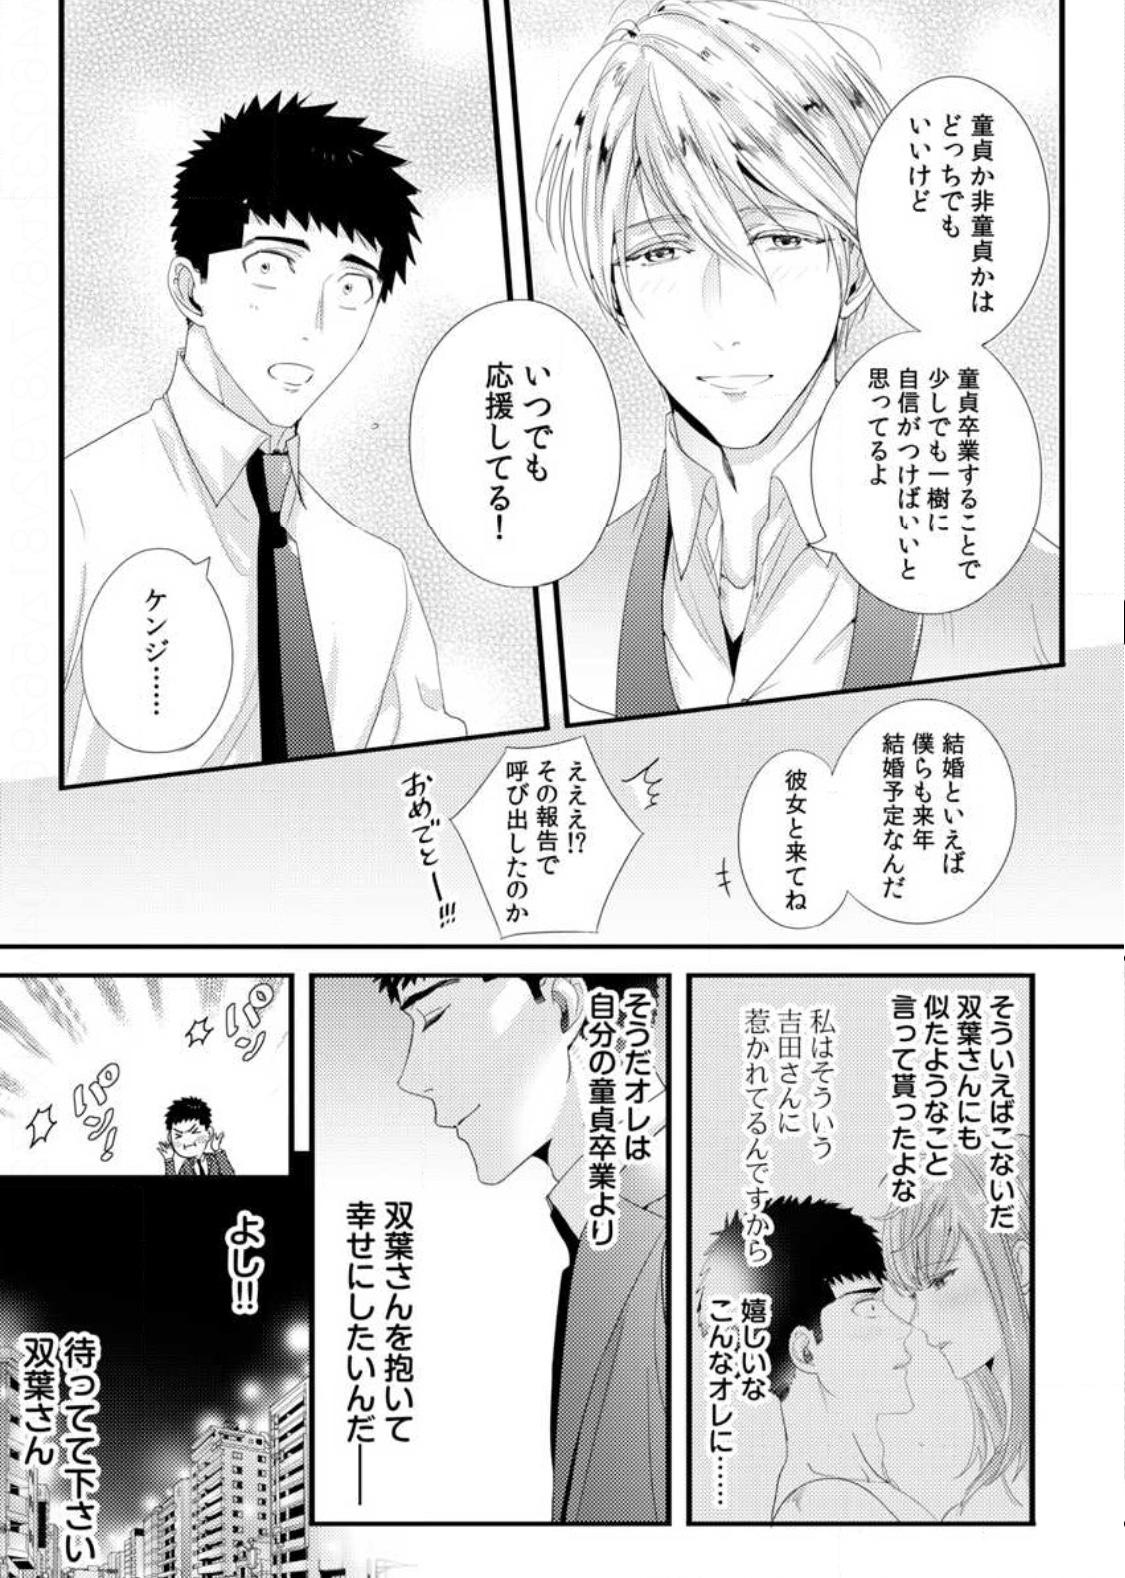 Please Let Me Hold You Futaba-San! Ch. 1-4 88